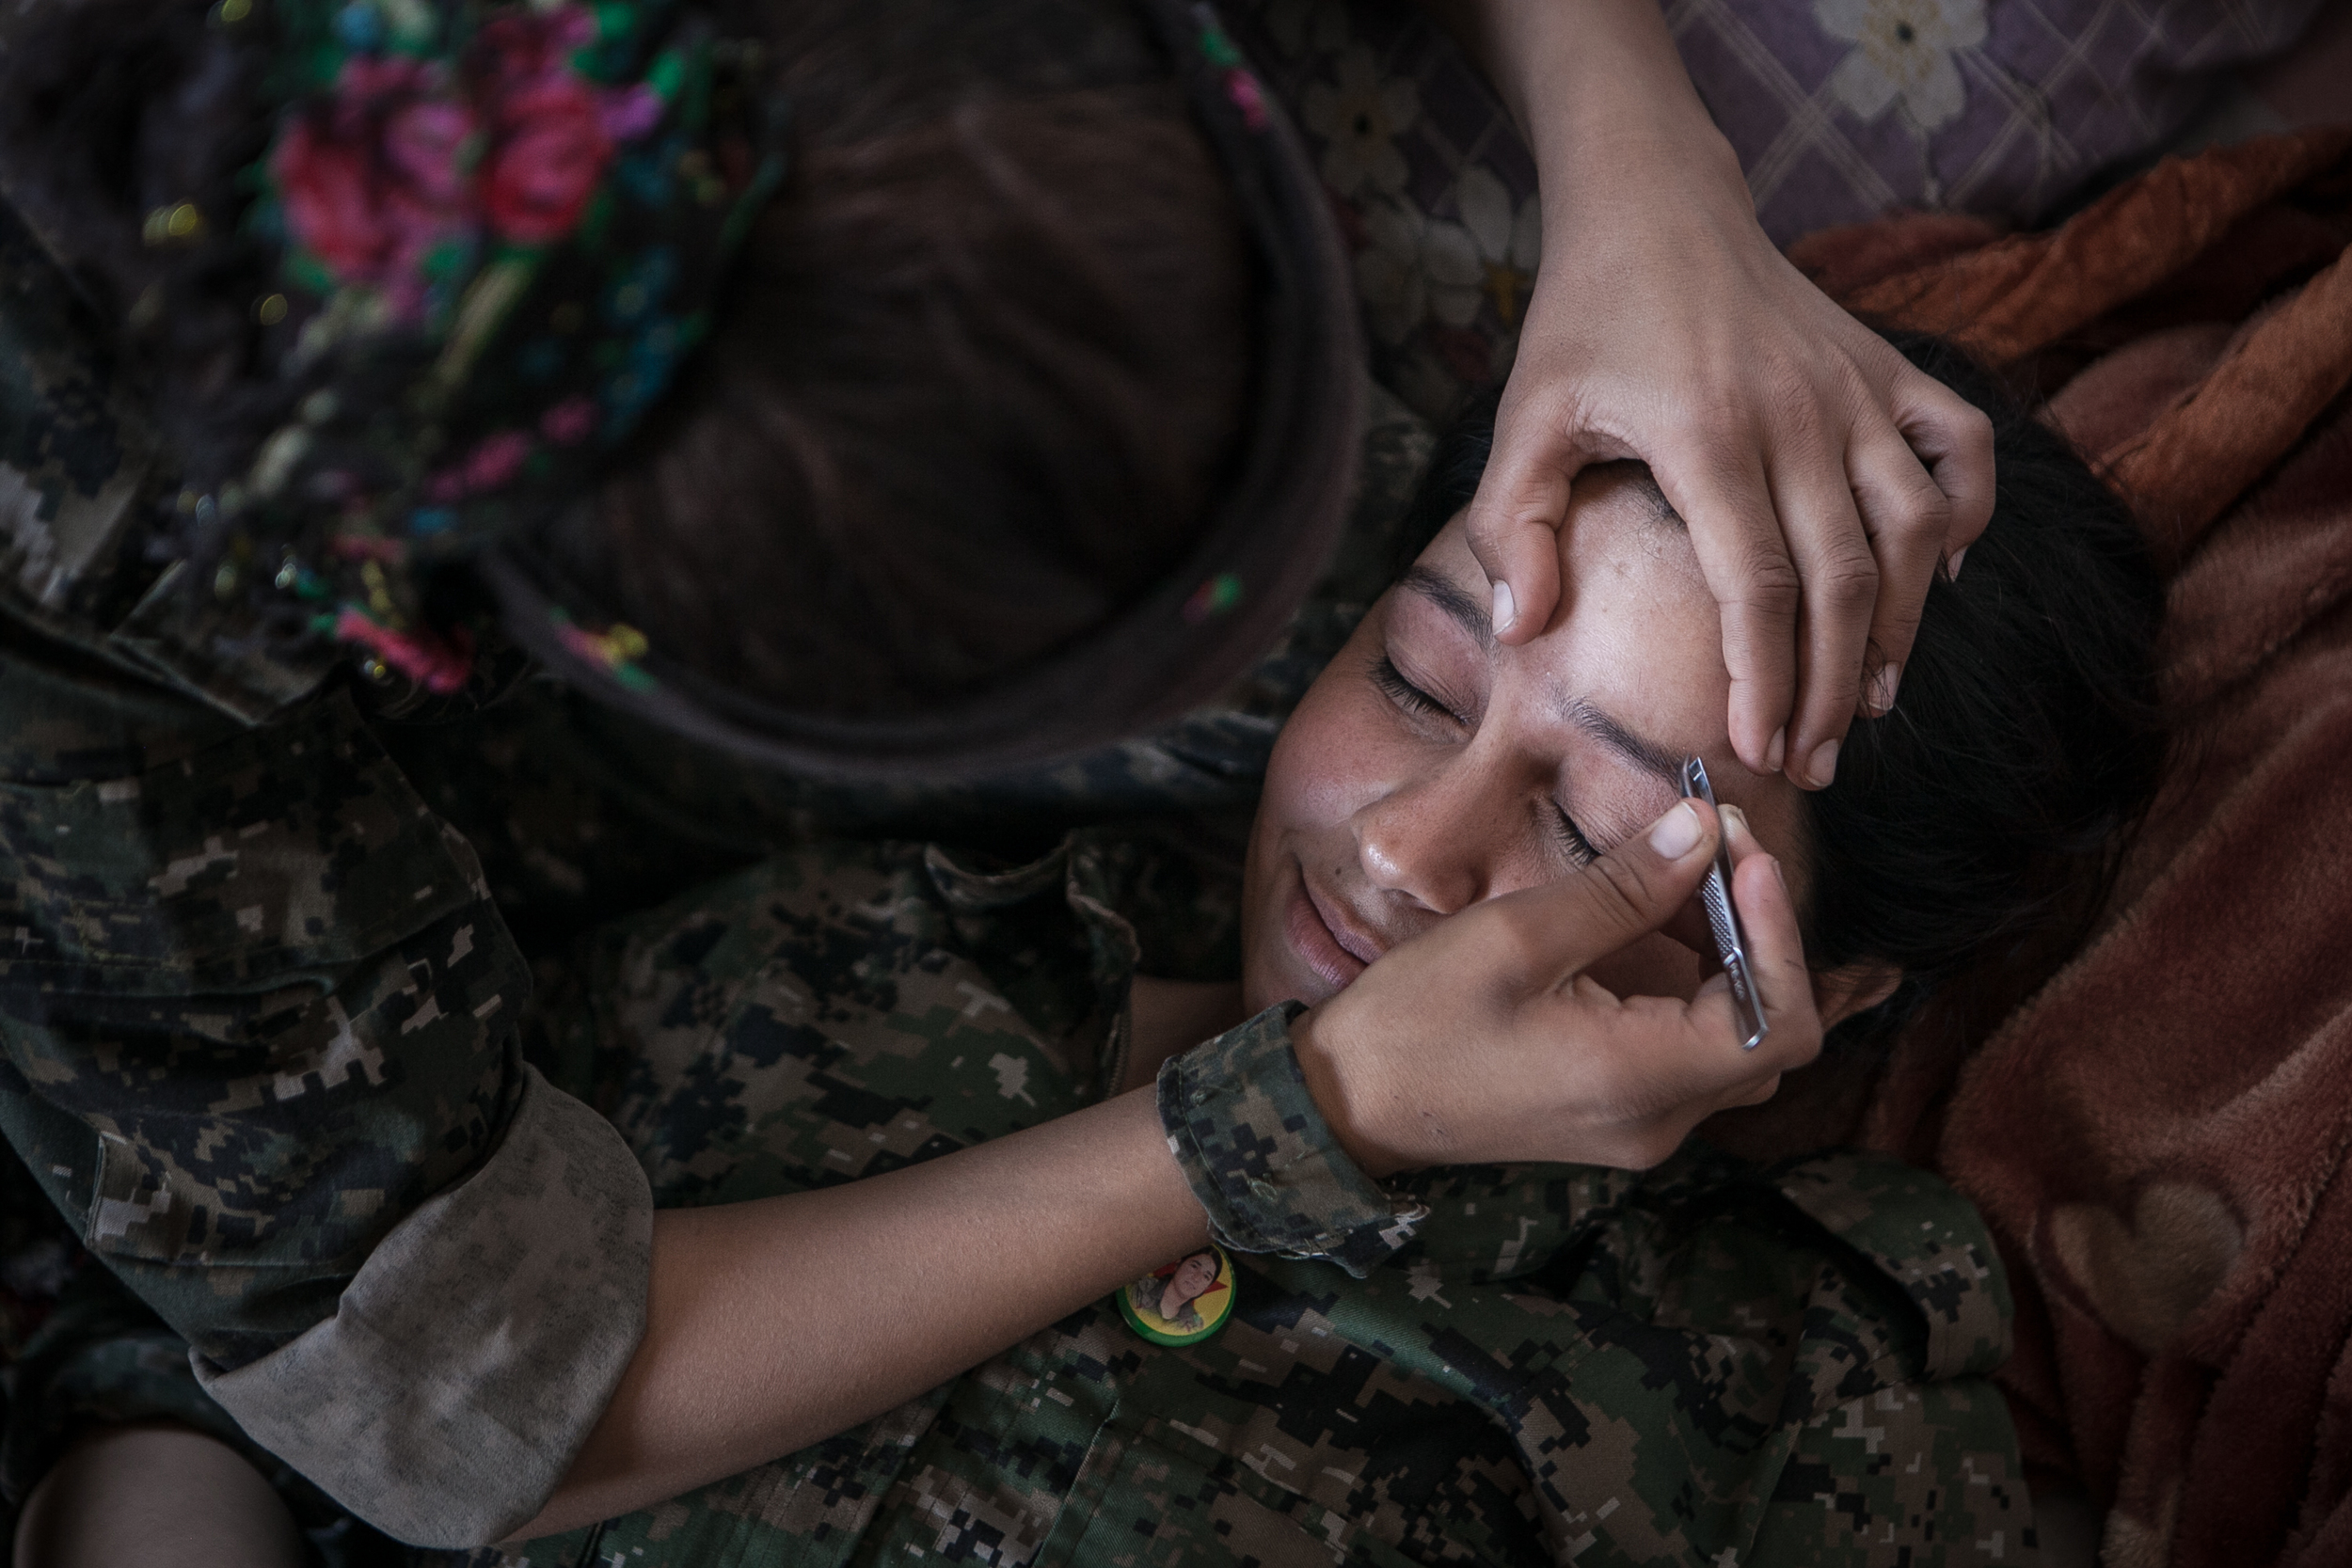  Azadi Qamishlo, 22, has her eyebrows plucked by a fellow soldier at a YPJ military base in the town of Til Kocer, Syria.  